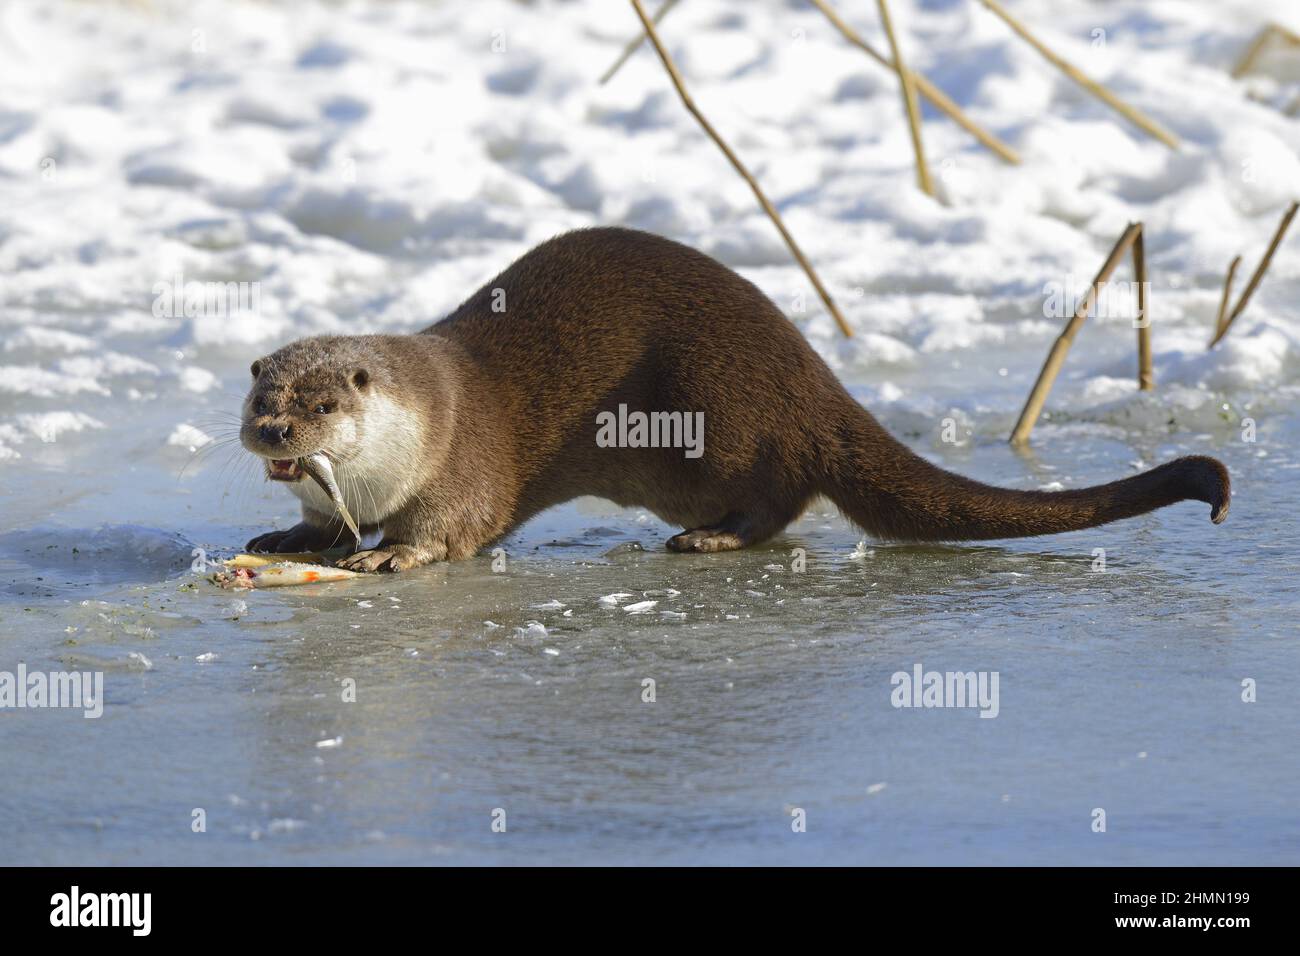 European river otter, European Otter, Eurasian Otter (Lutra lutra), stands on a frozen pond and eating a caught fish, side view, Germany, Brandenburg Stock Photo